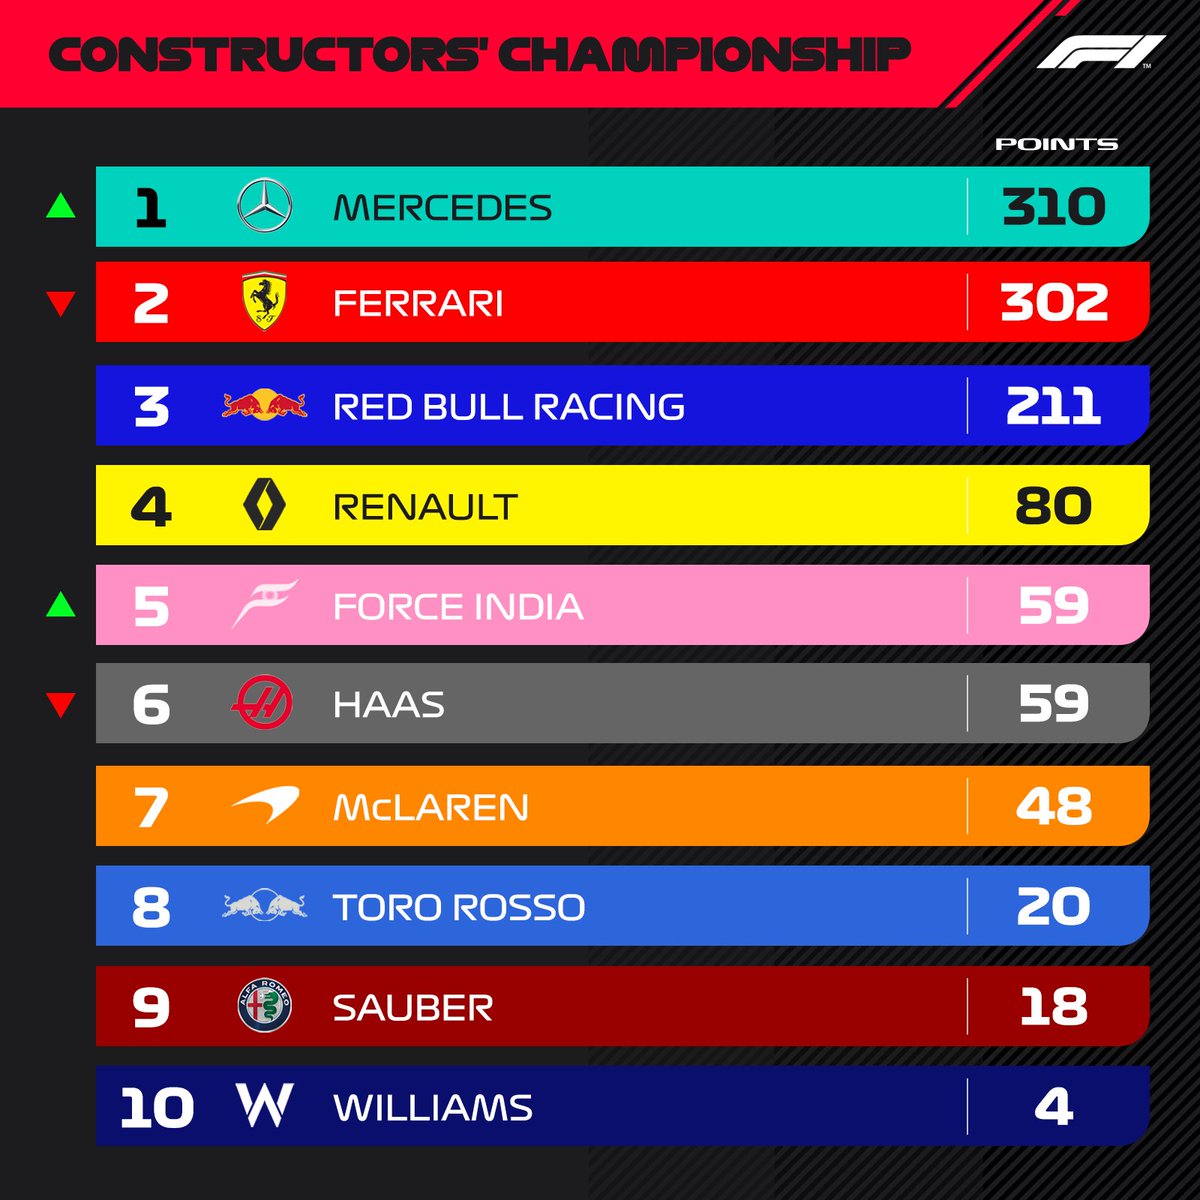 A change at the top...  #GermanGP #F1 https://t.co/xledeNUvaH